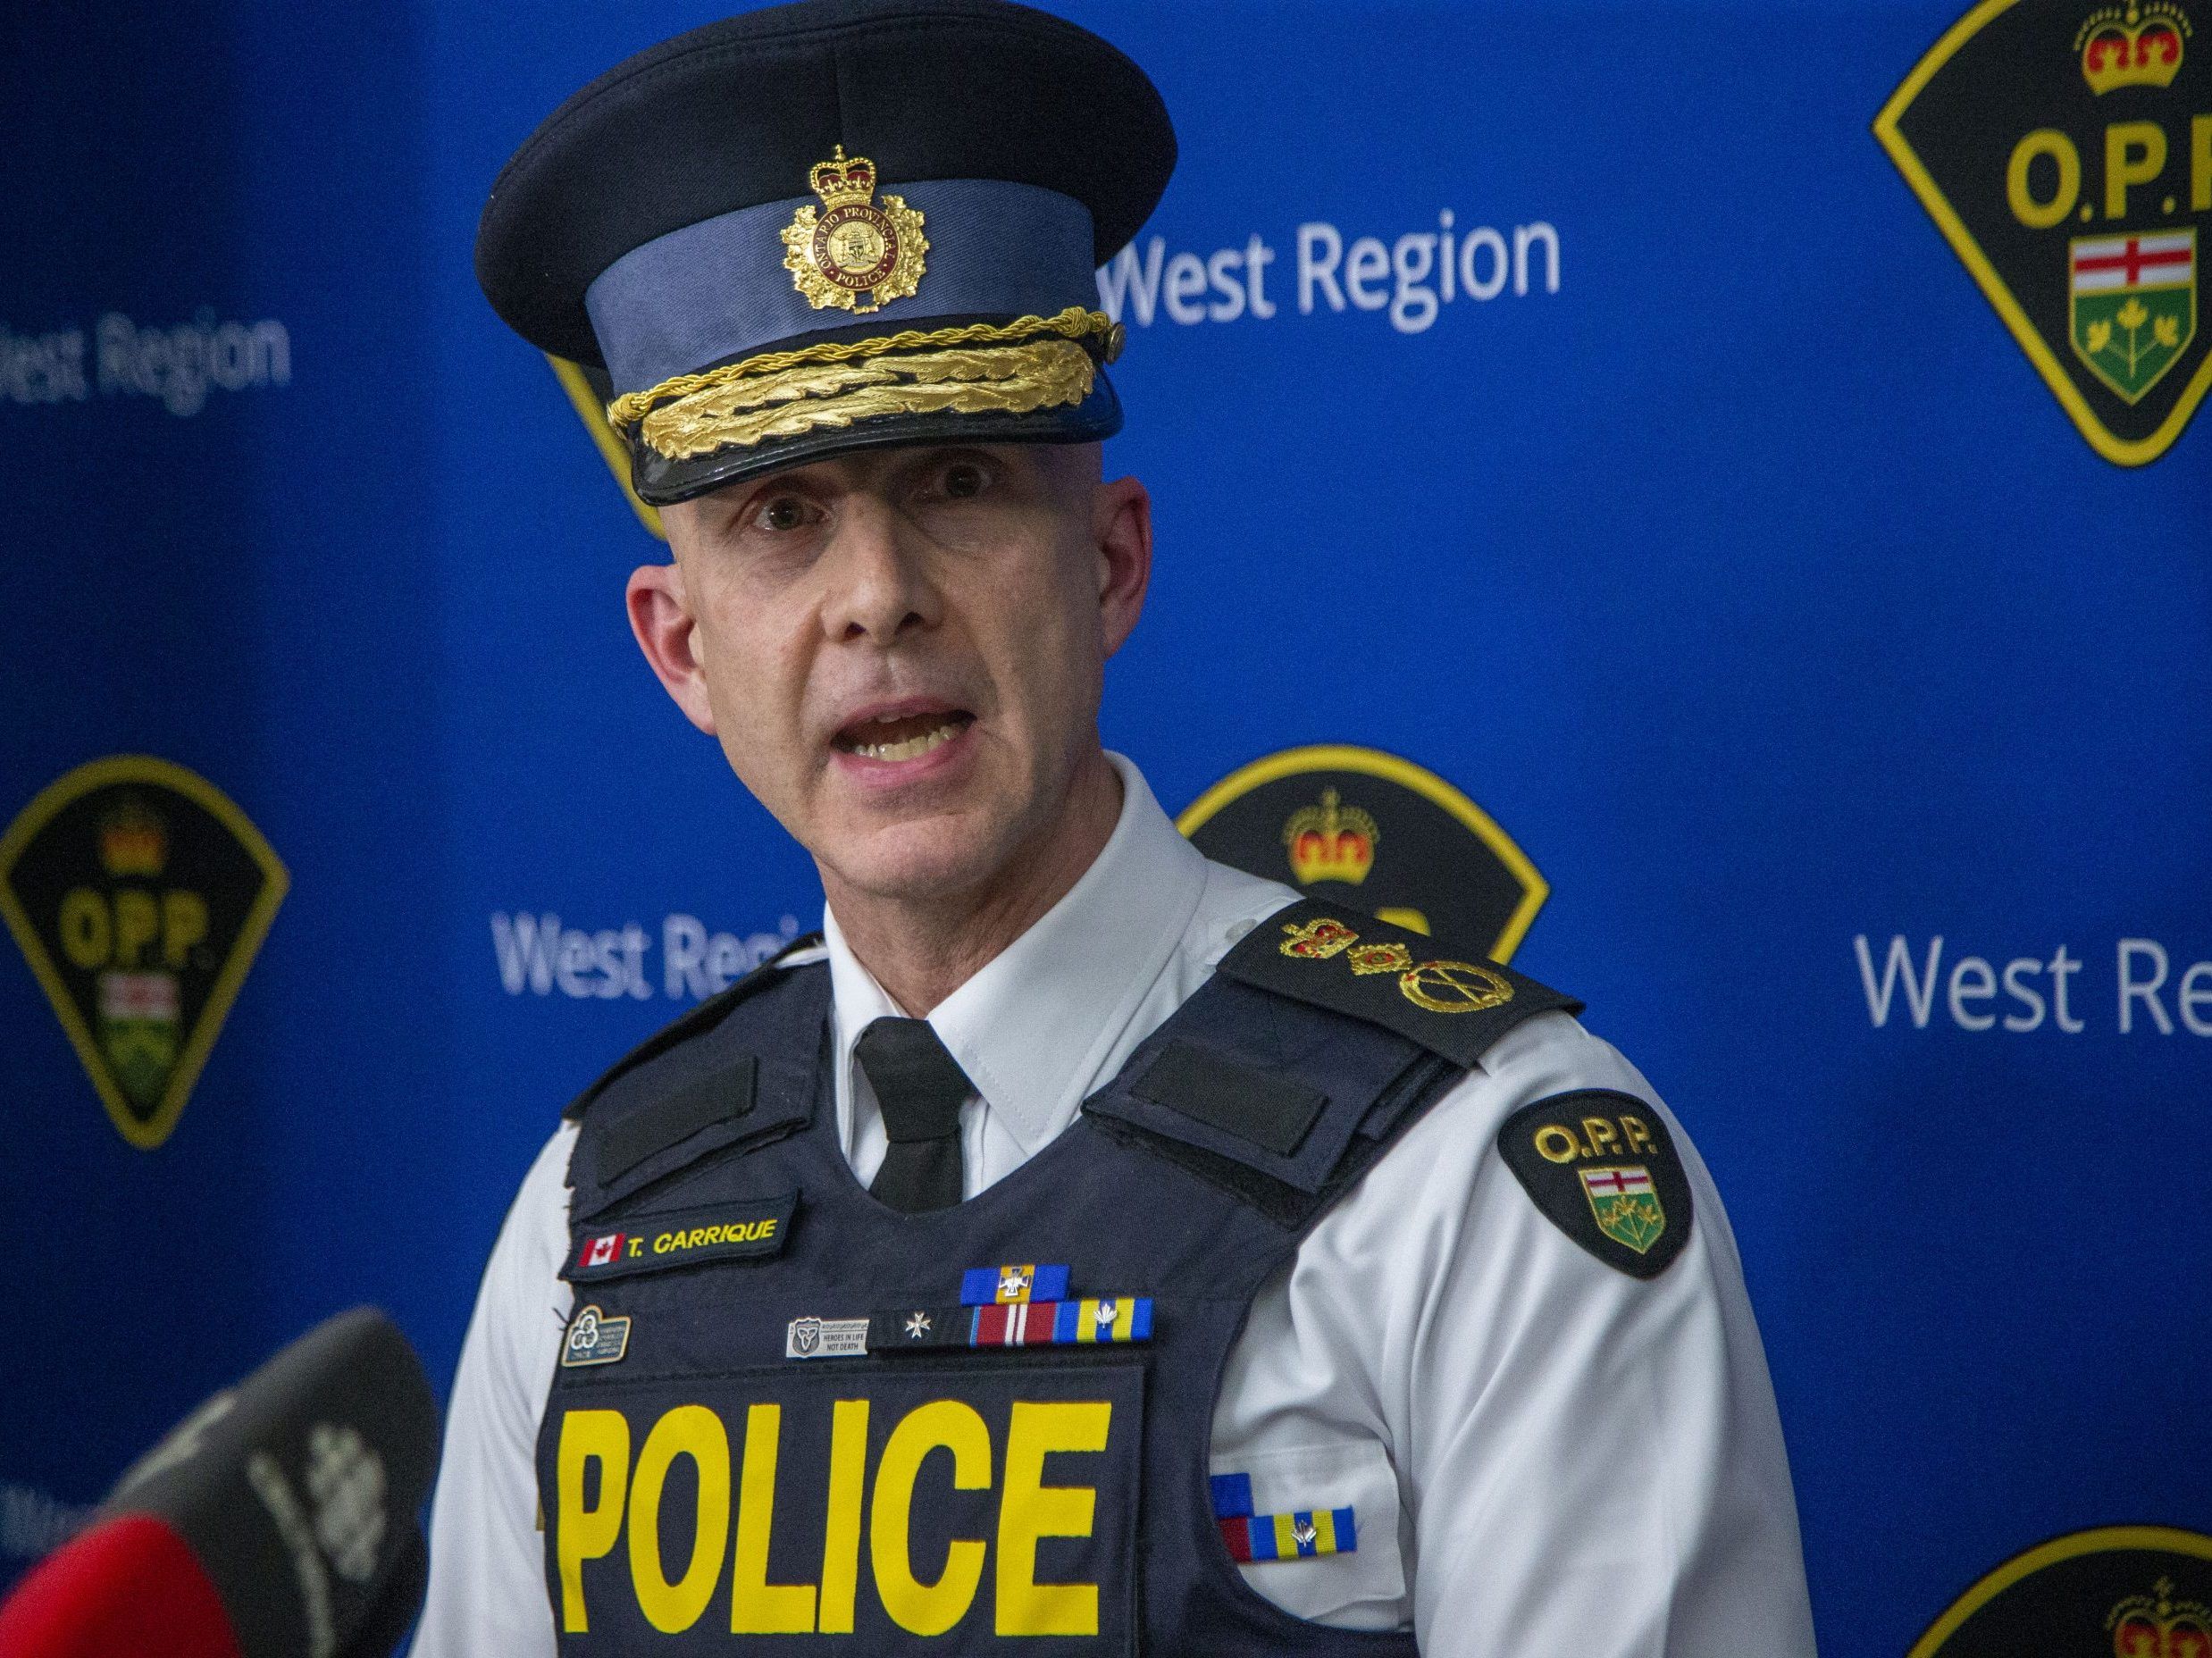 'Outraged' Ontario's top cop demands bail change after officer's